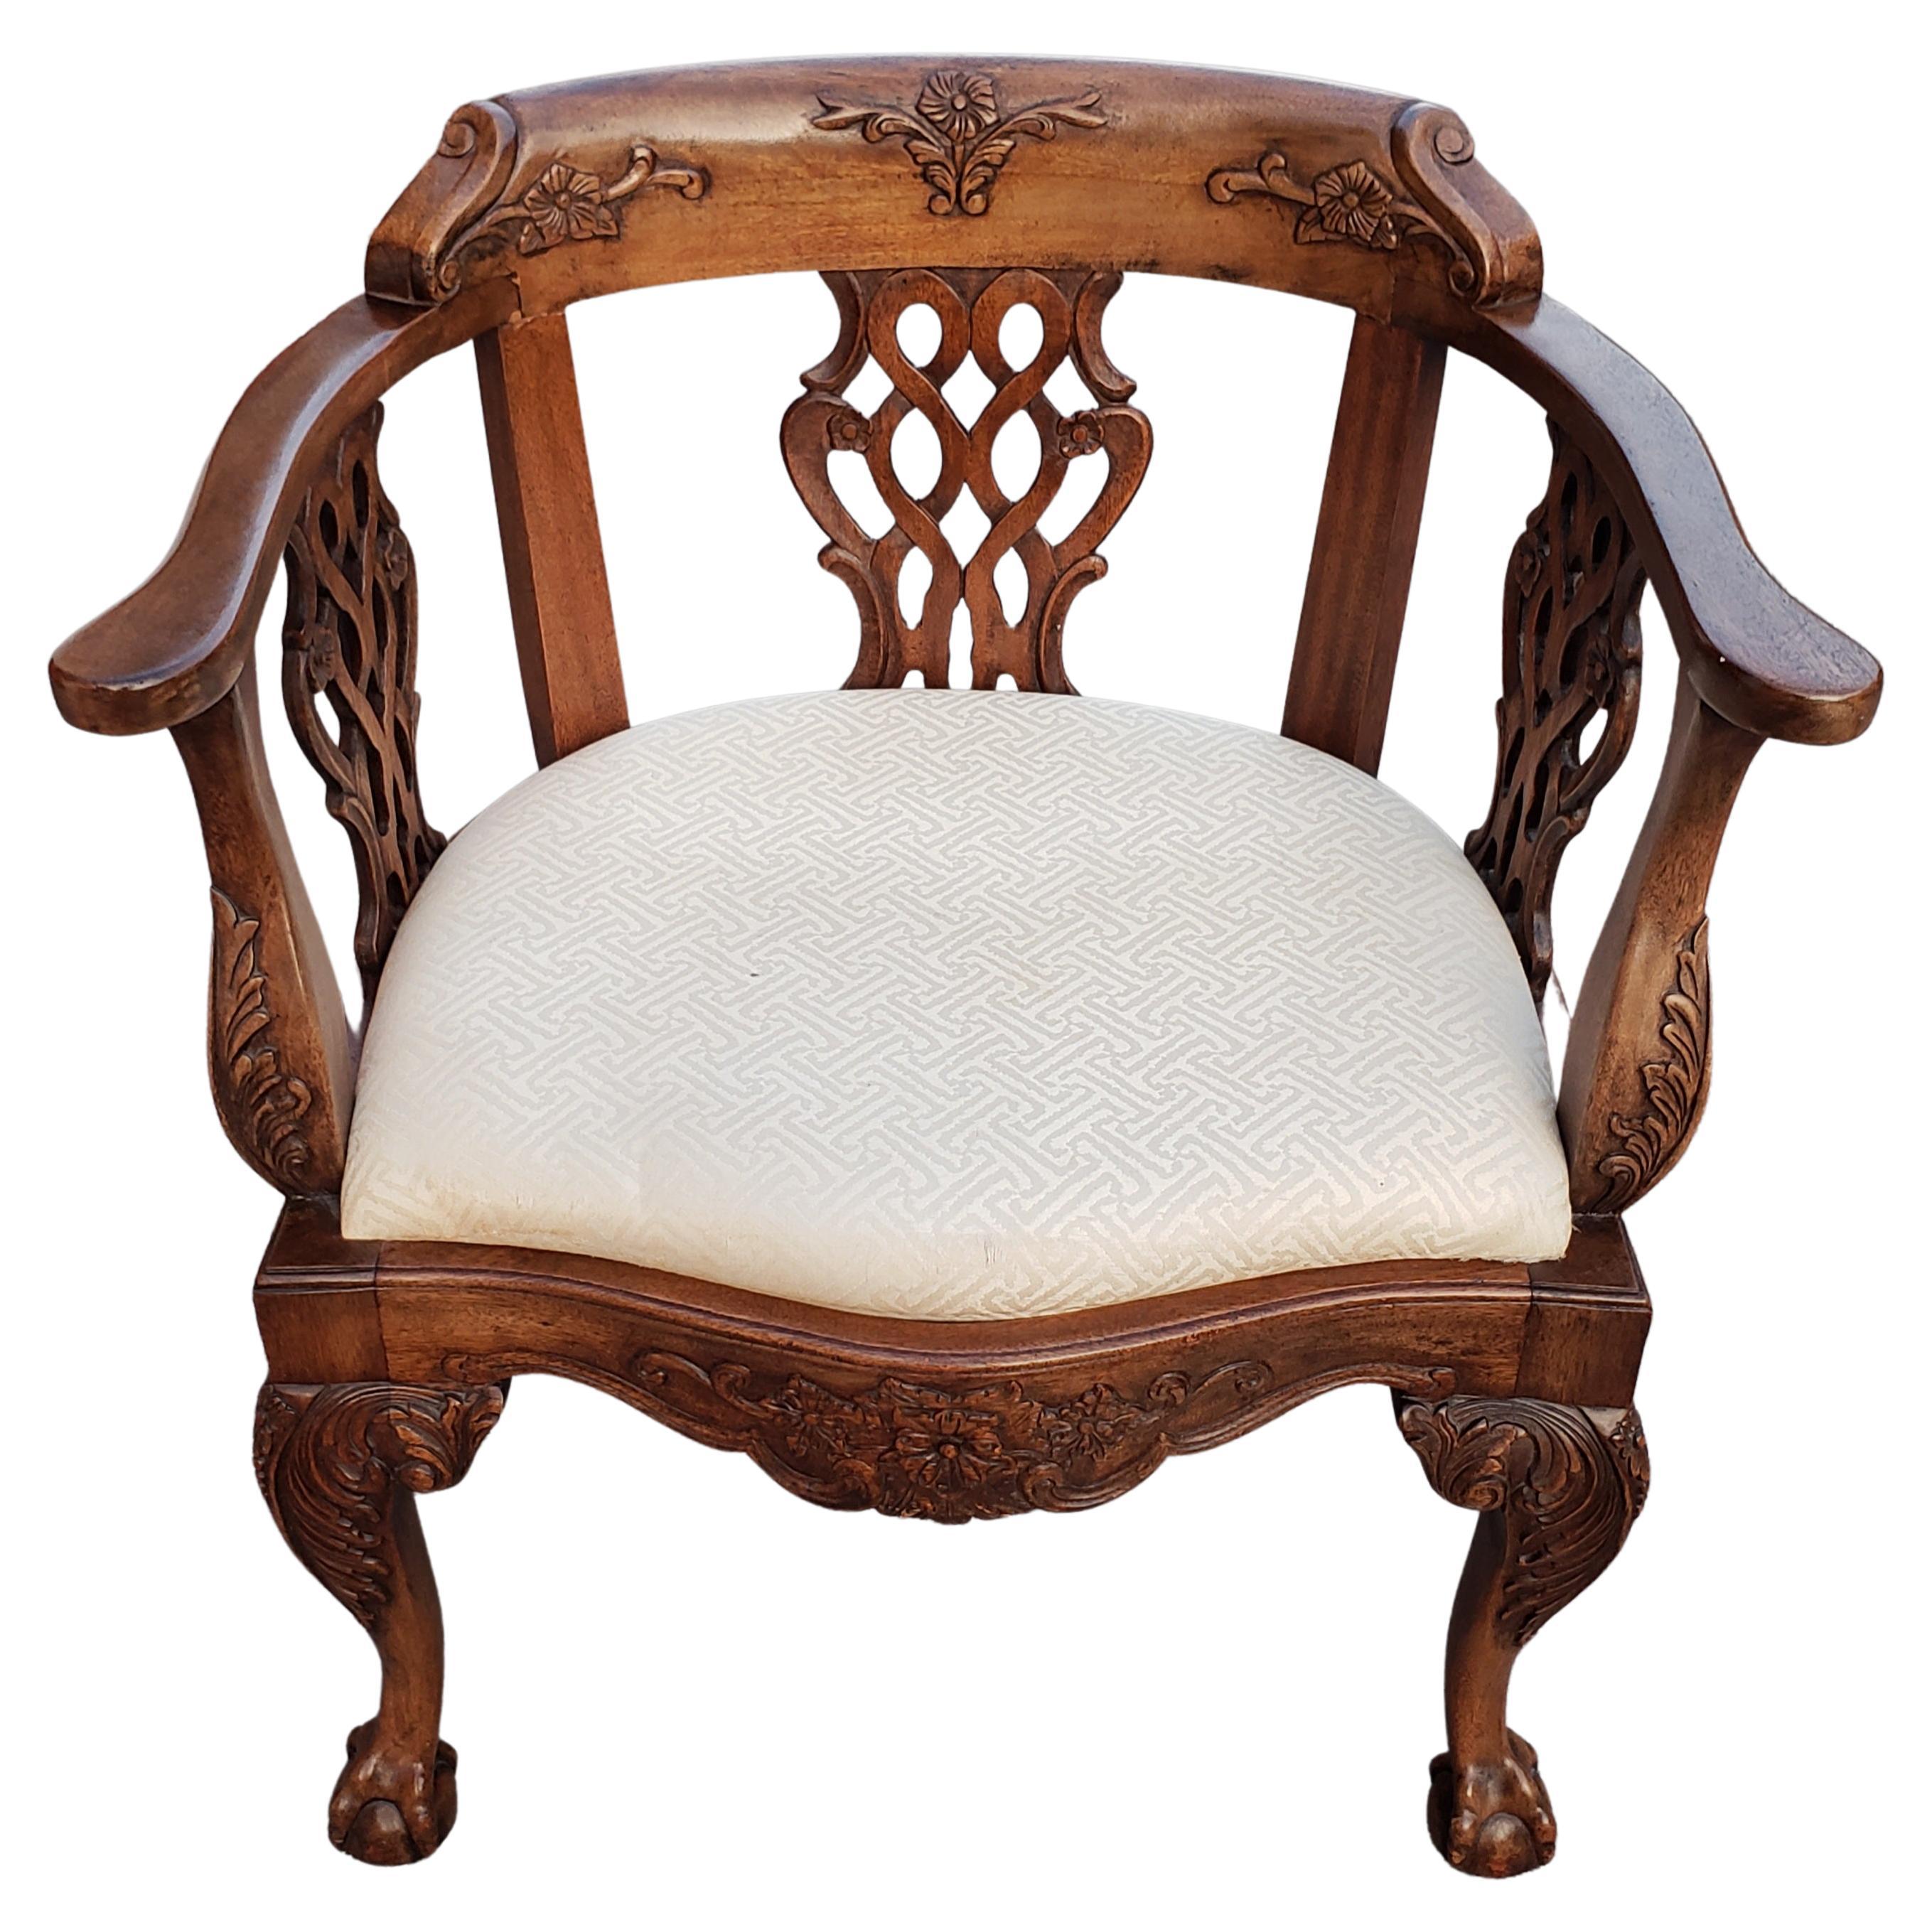 George III Georgian Style Heavily Carved Mahogany Arm Chair with Ball and Claw Feet